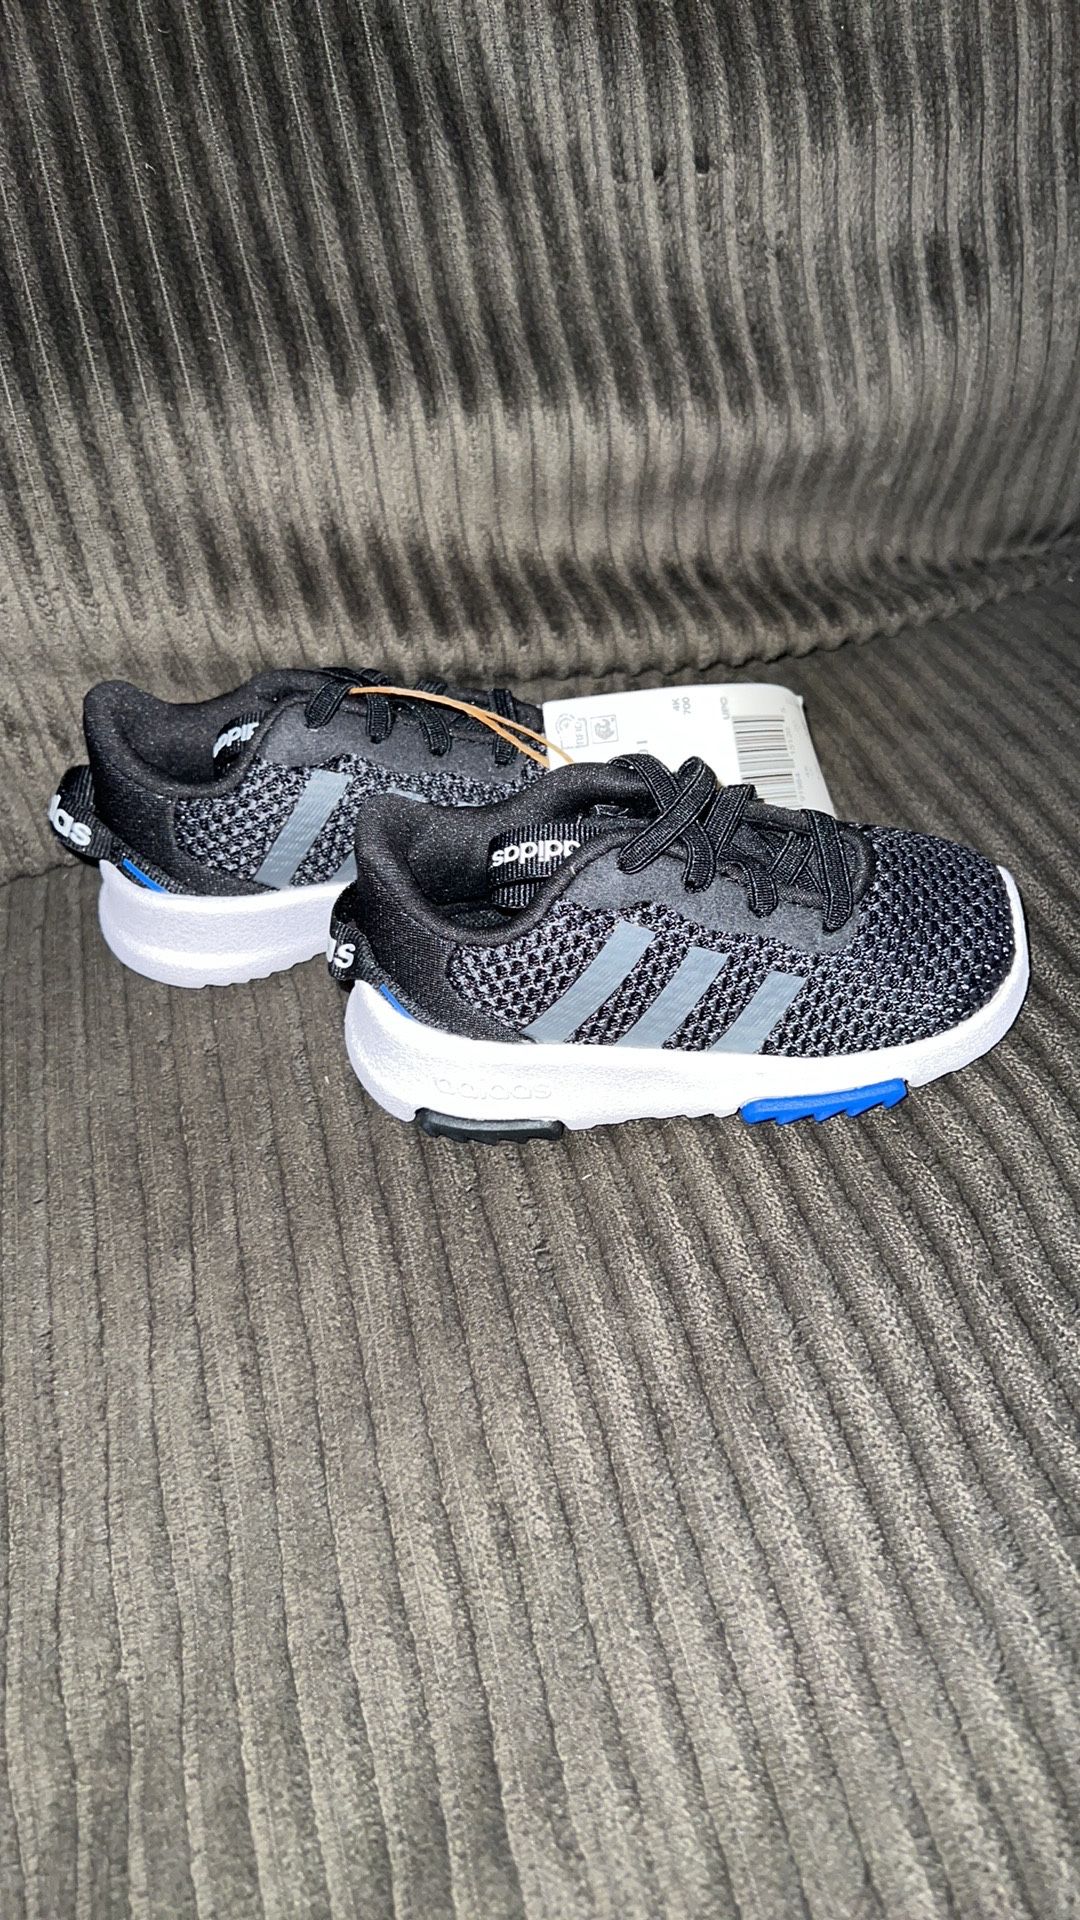 Toddler Adidas Sneakers for Sale Los Angeles, - OfferUp